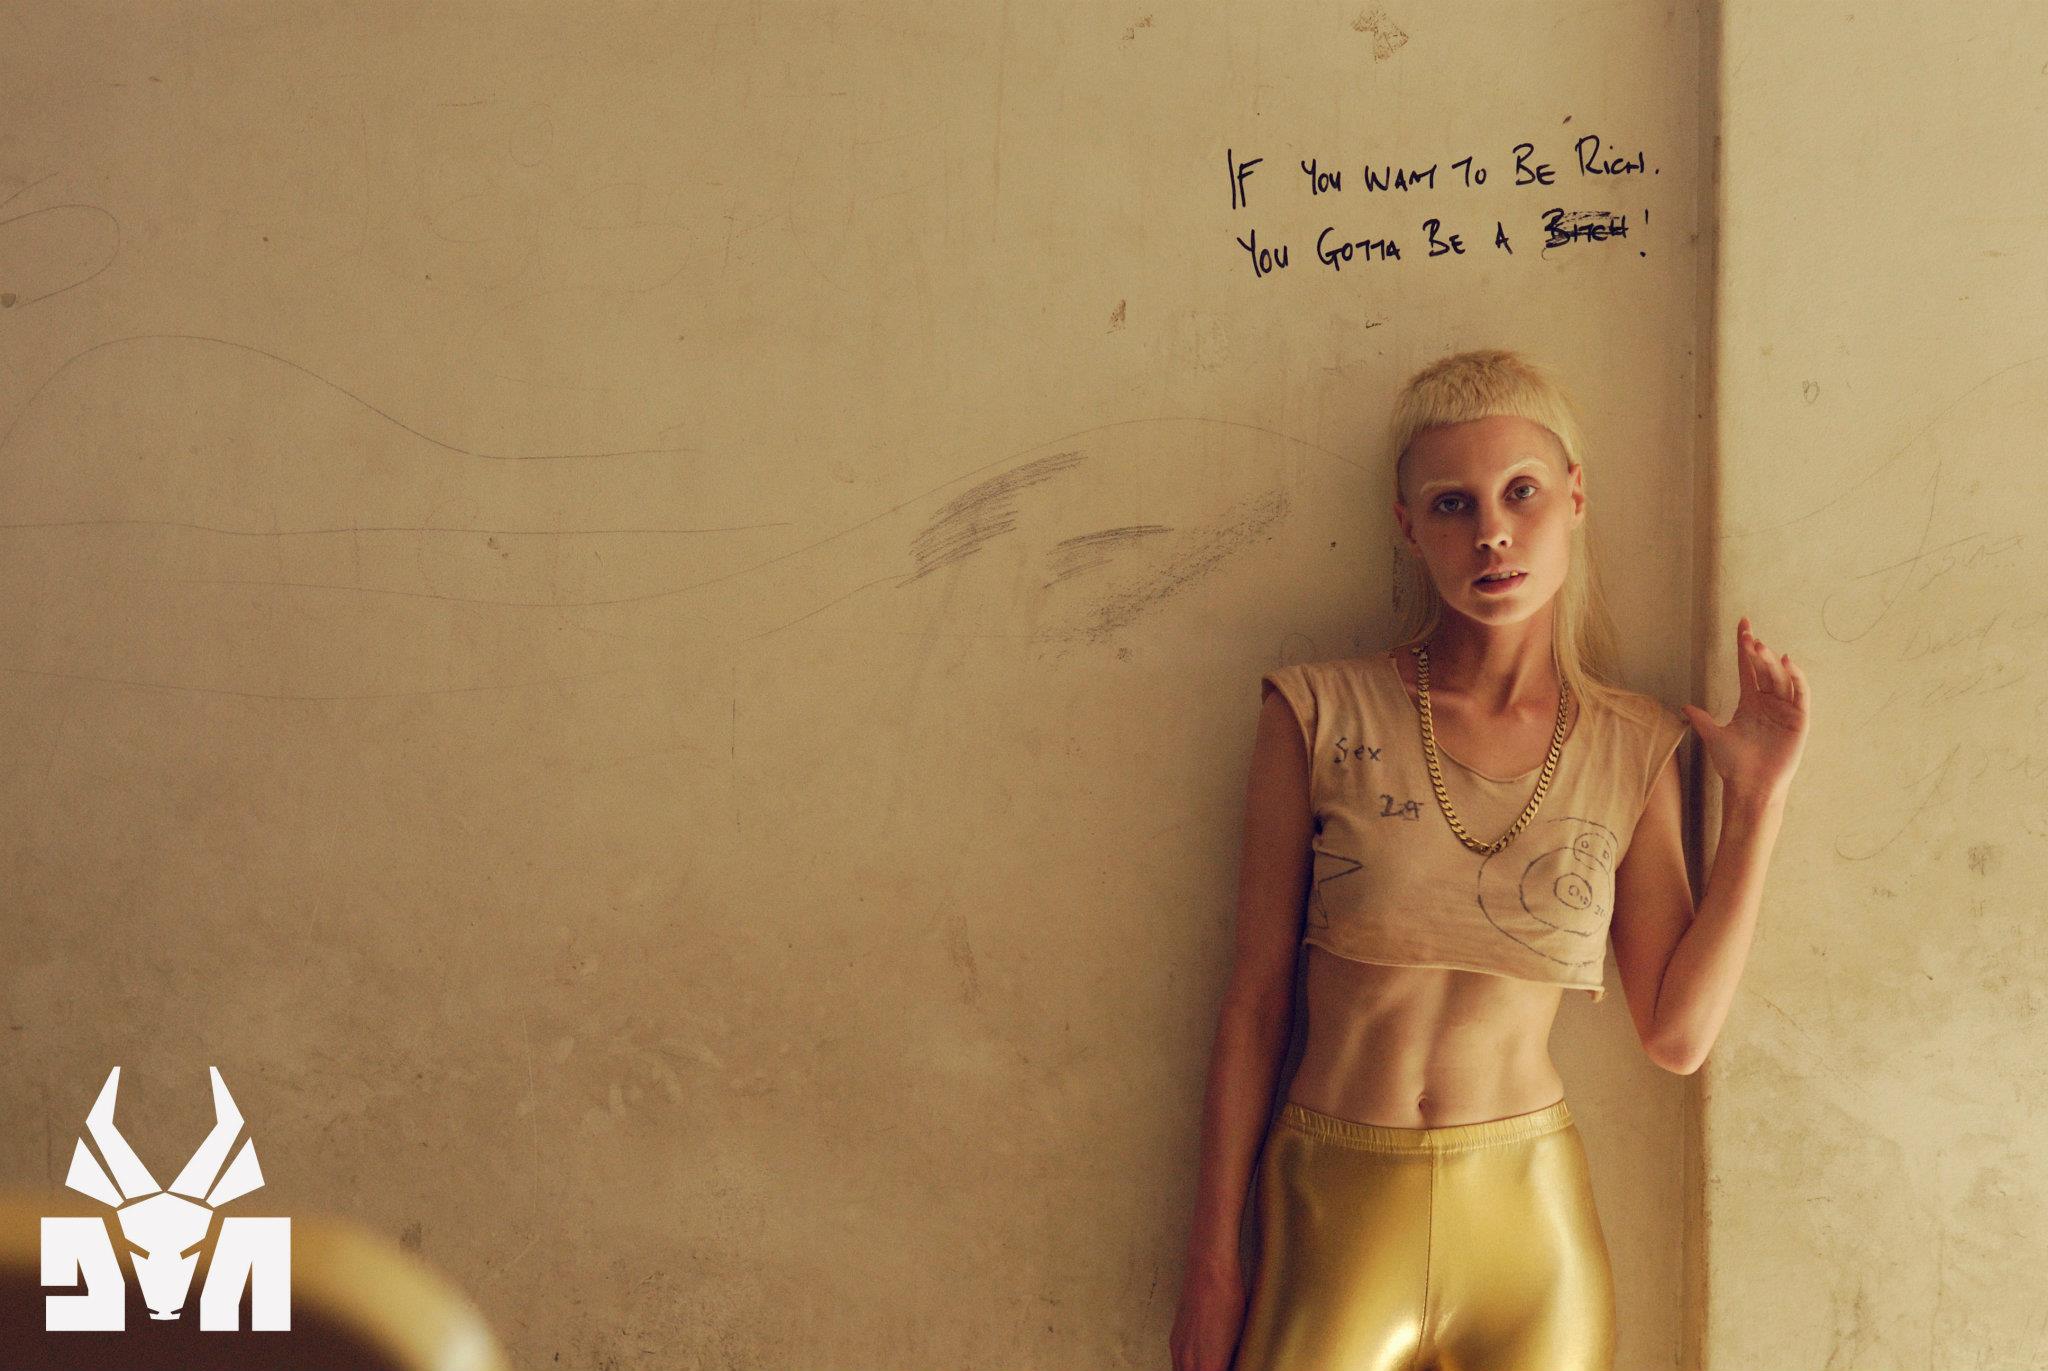 yolandi gold blonde if you want to be rich